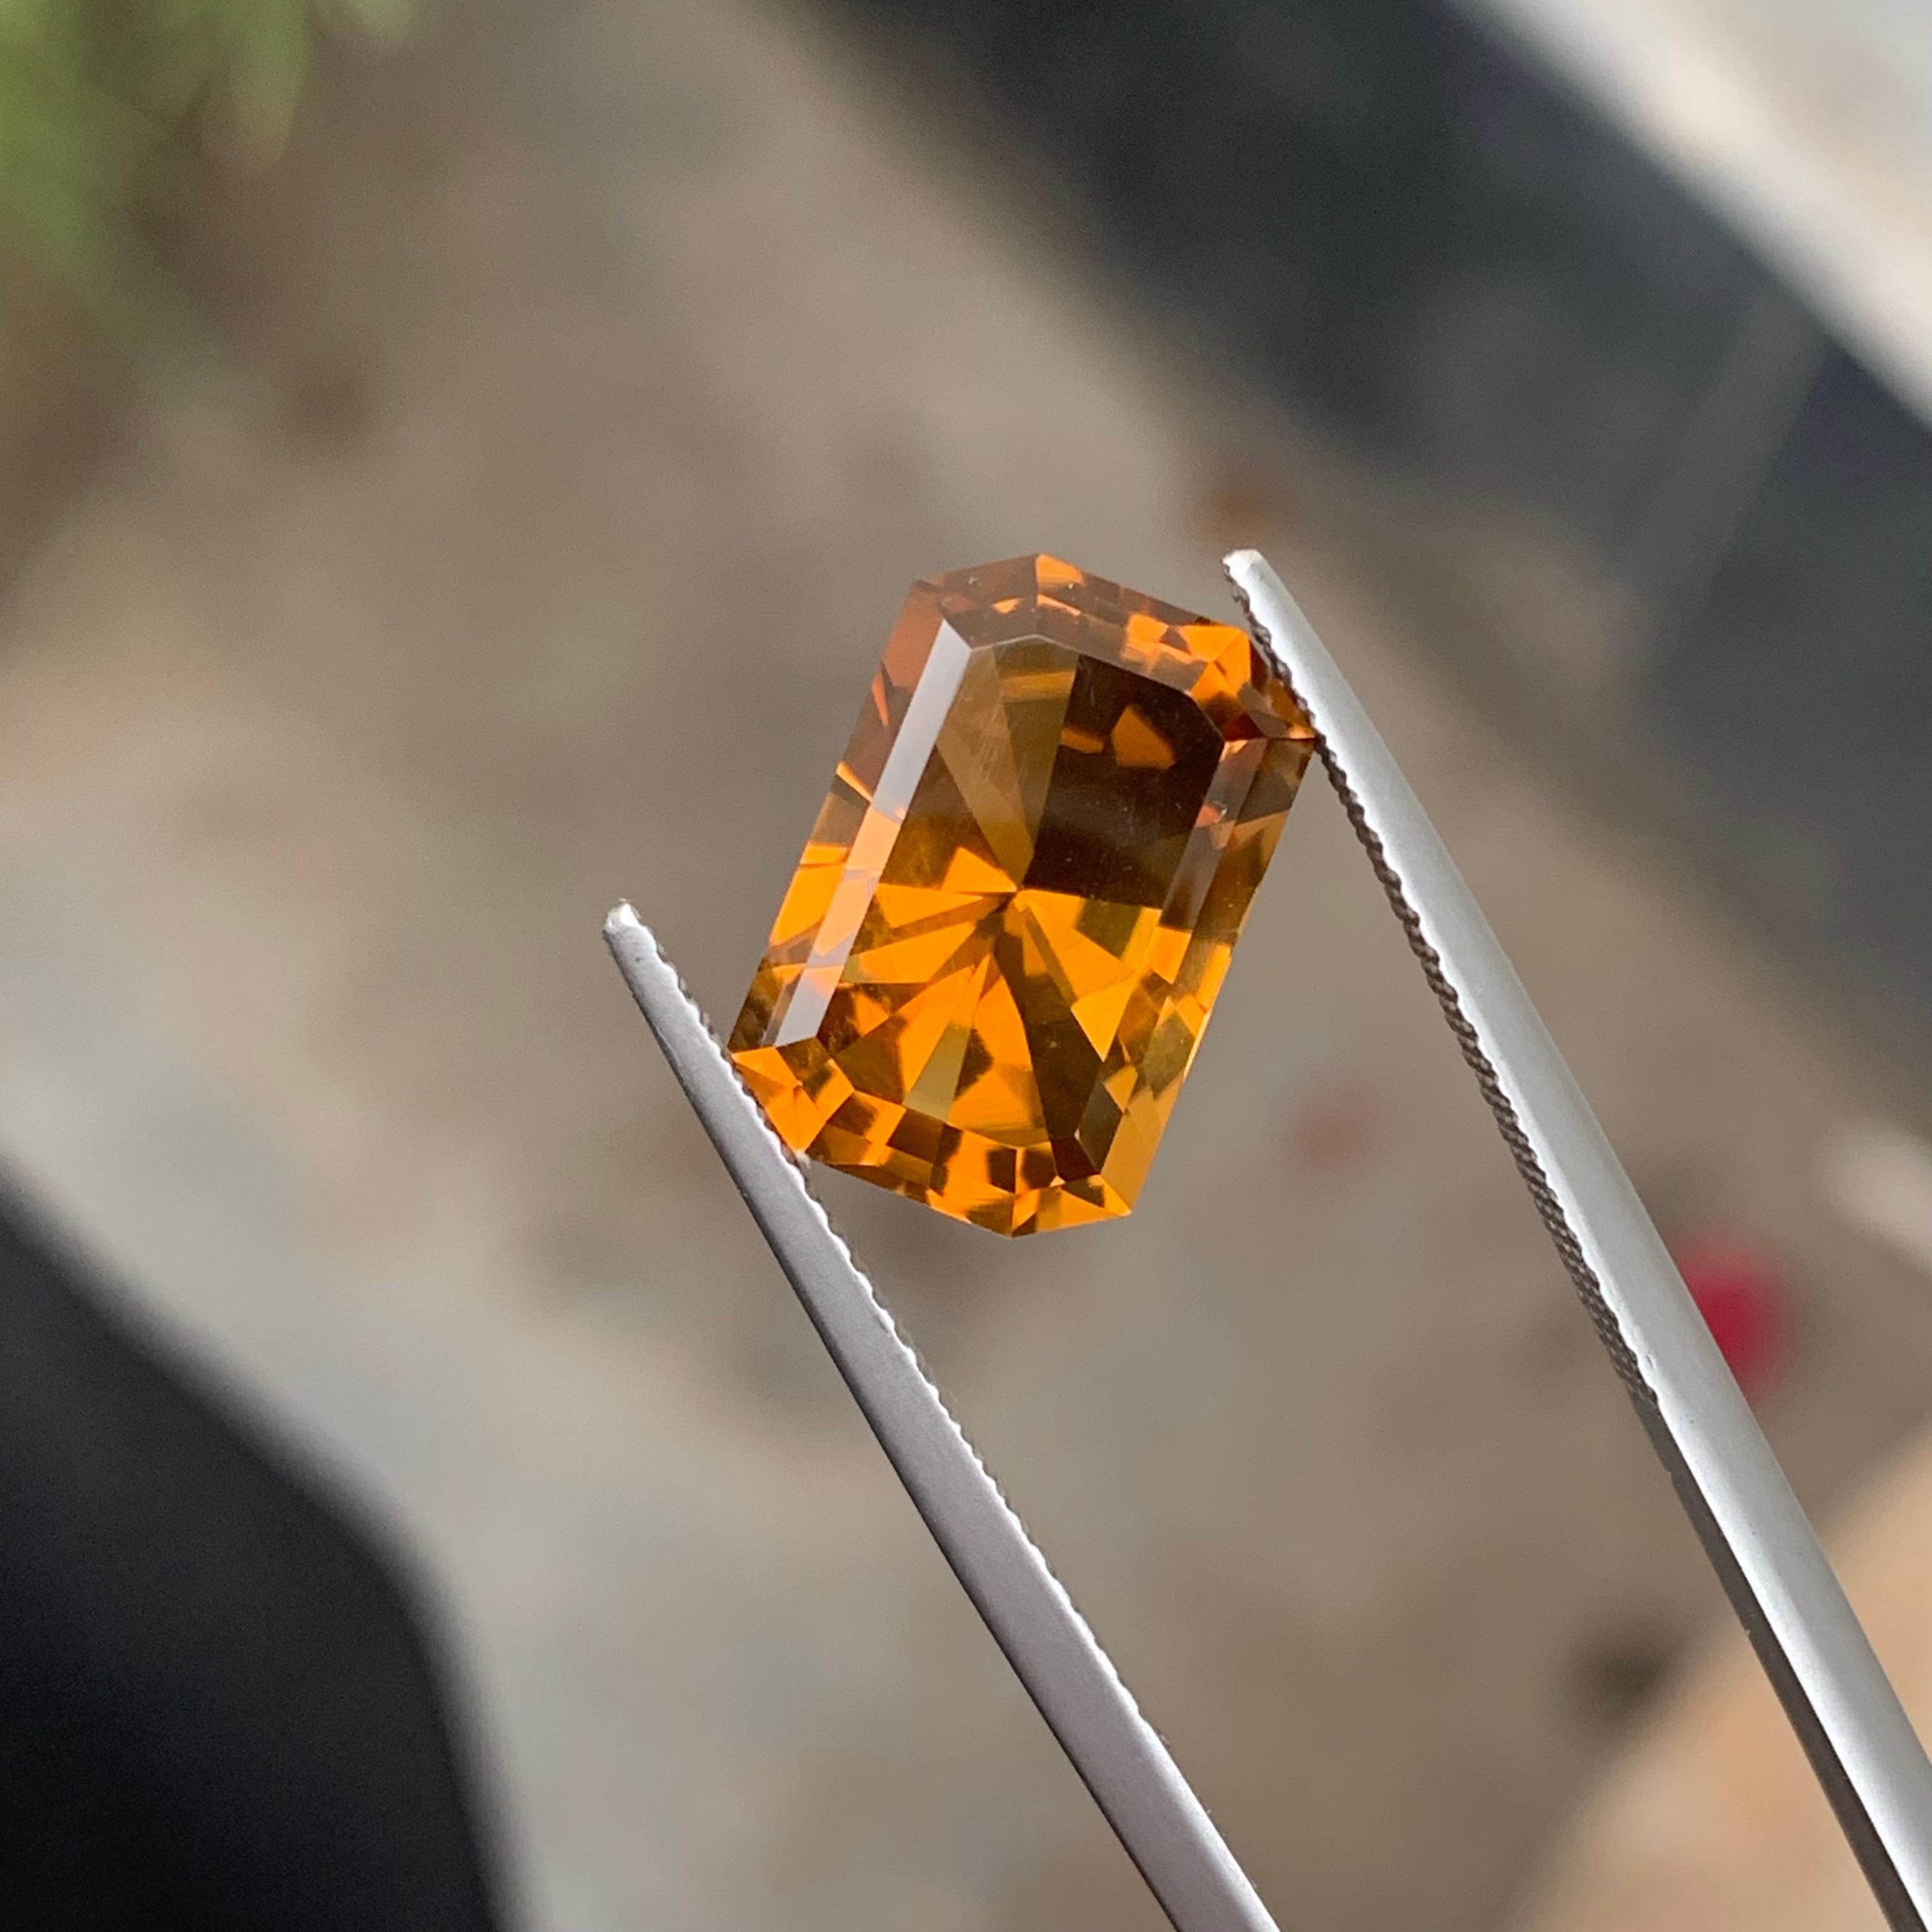 Faceted Honey Citrine
Weight : 5.15 Carats
Dimensions : 13.1x8.8x7.1 Mm
Clarity : Eye Clean 
Origin : Brazil
Color: Yellow
Shape: Emerald
Certificate: On Demand
Month: November
.
The Many Healing Properties of Citrine
Increase Optimism, And Sunny